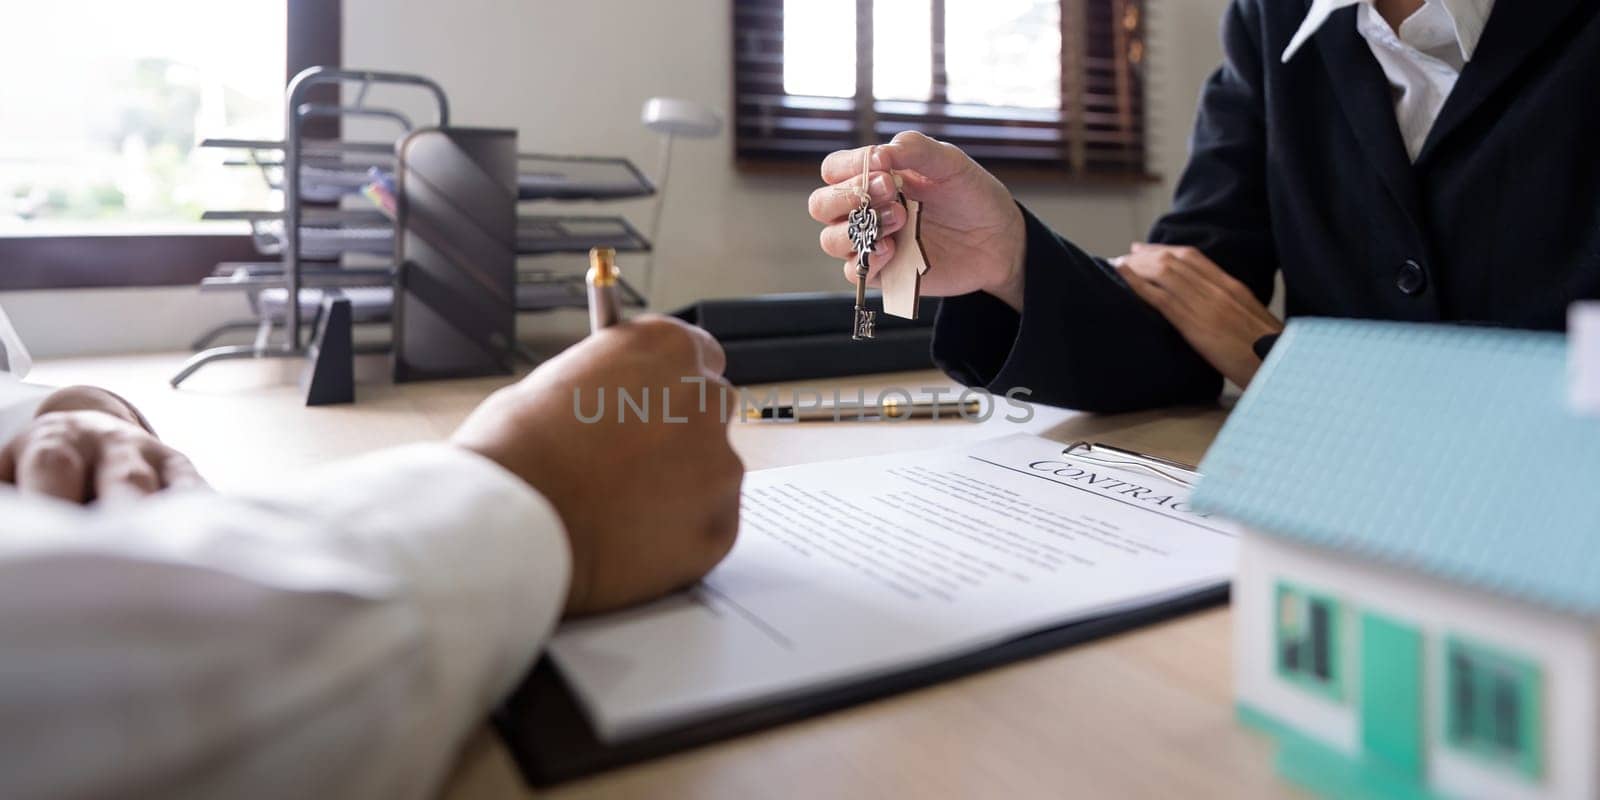 Real estate agents agree to purchase a home and give keys to clients at office. Concept agreement.